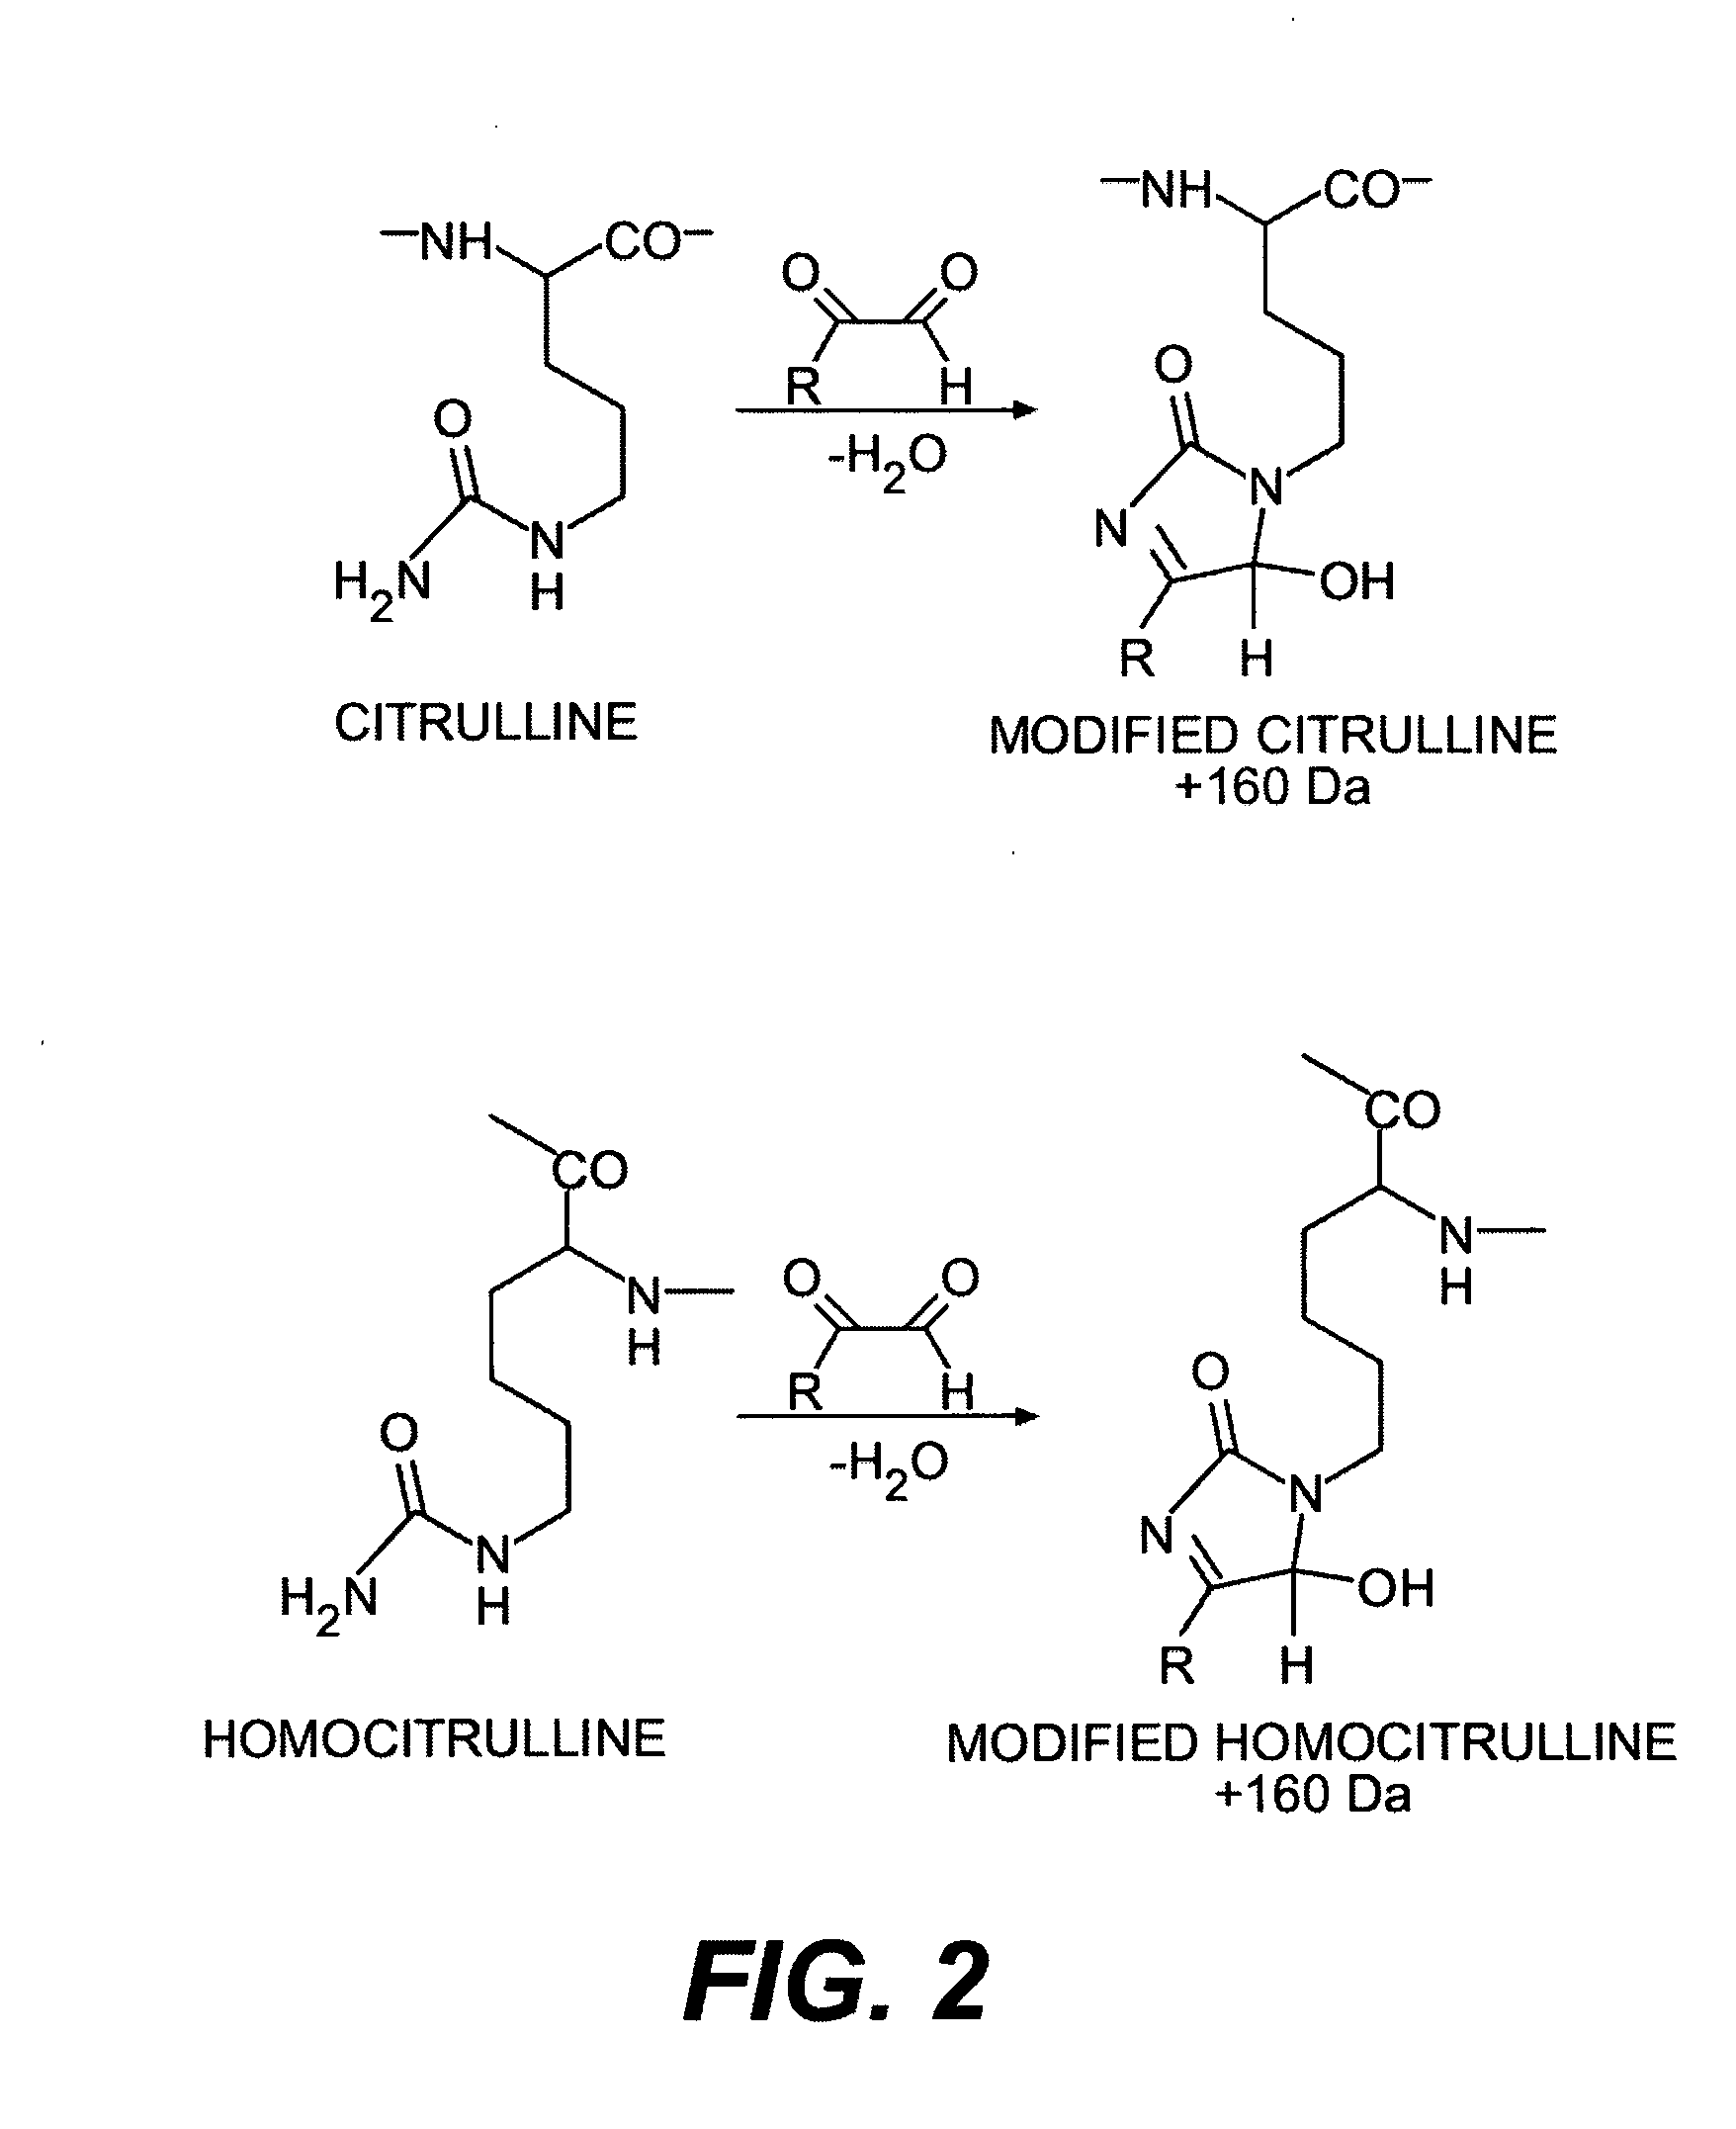 Methods for modifying, isolating, detecting, visualizing, and quantifying citrullinated and/or homocitrullinated peptides, polypeptides and proteins